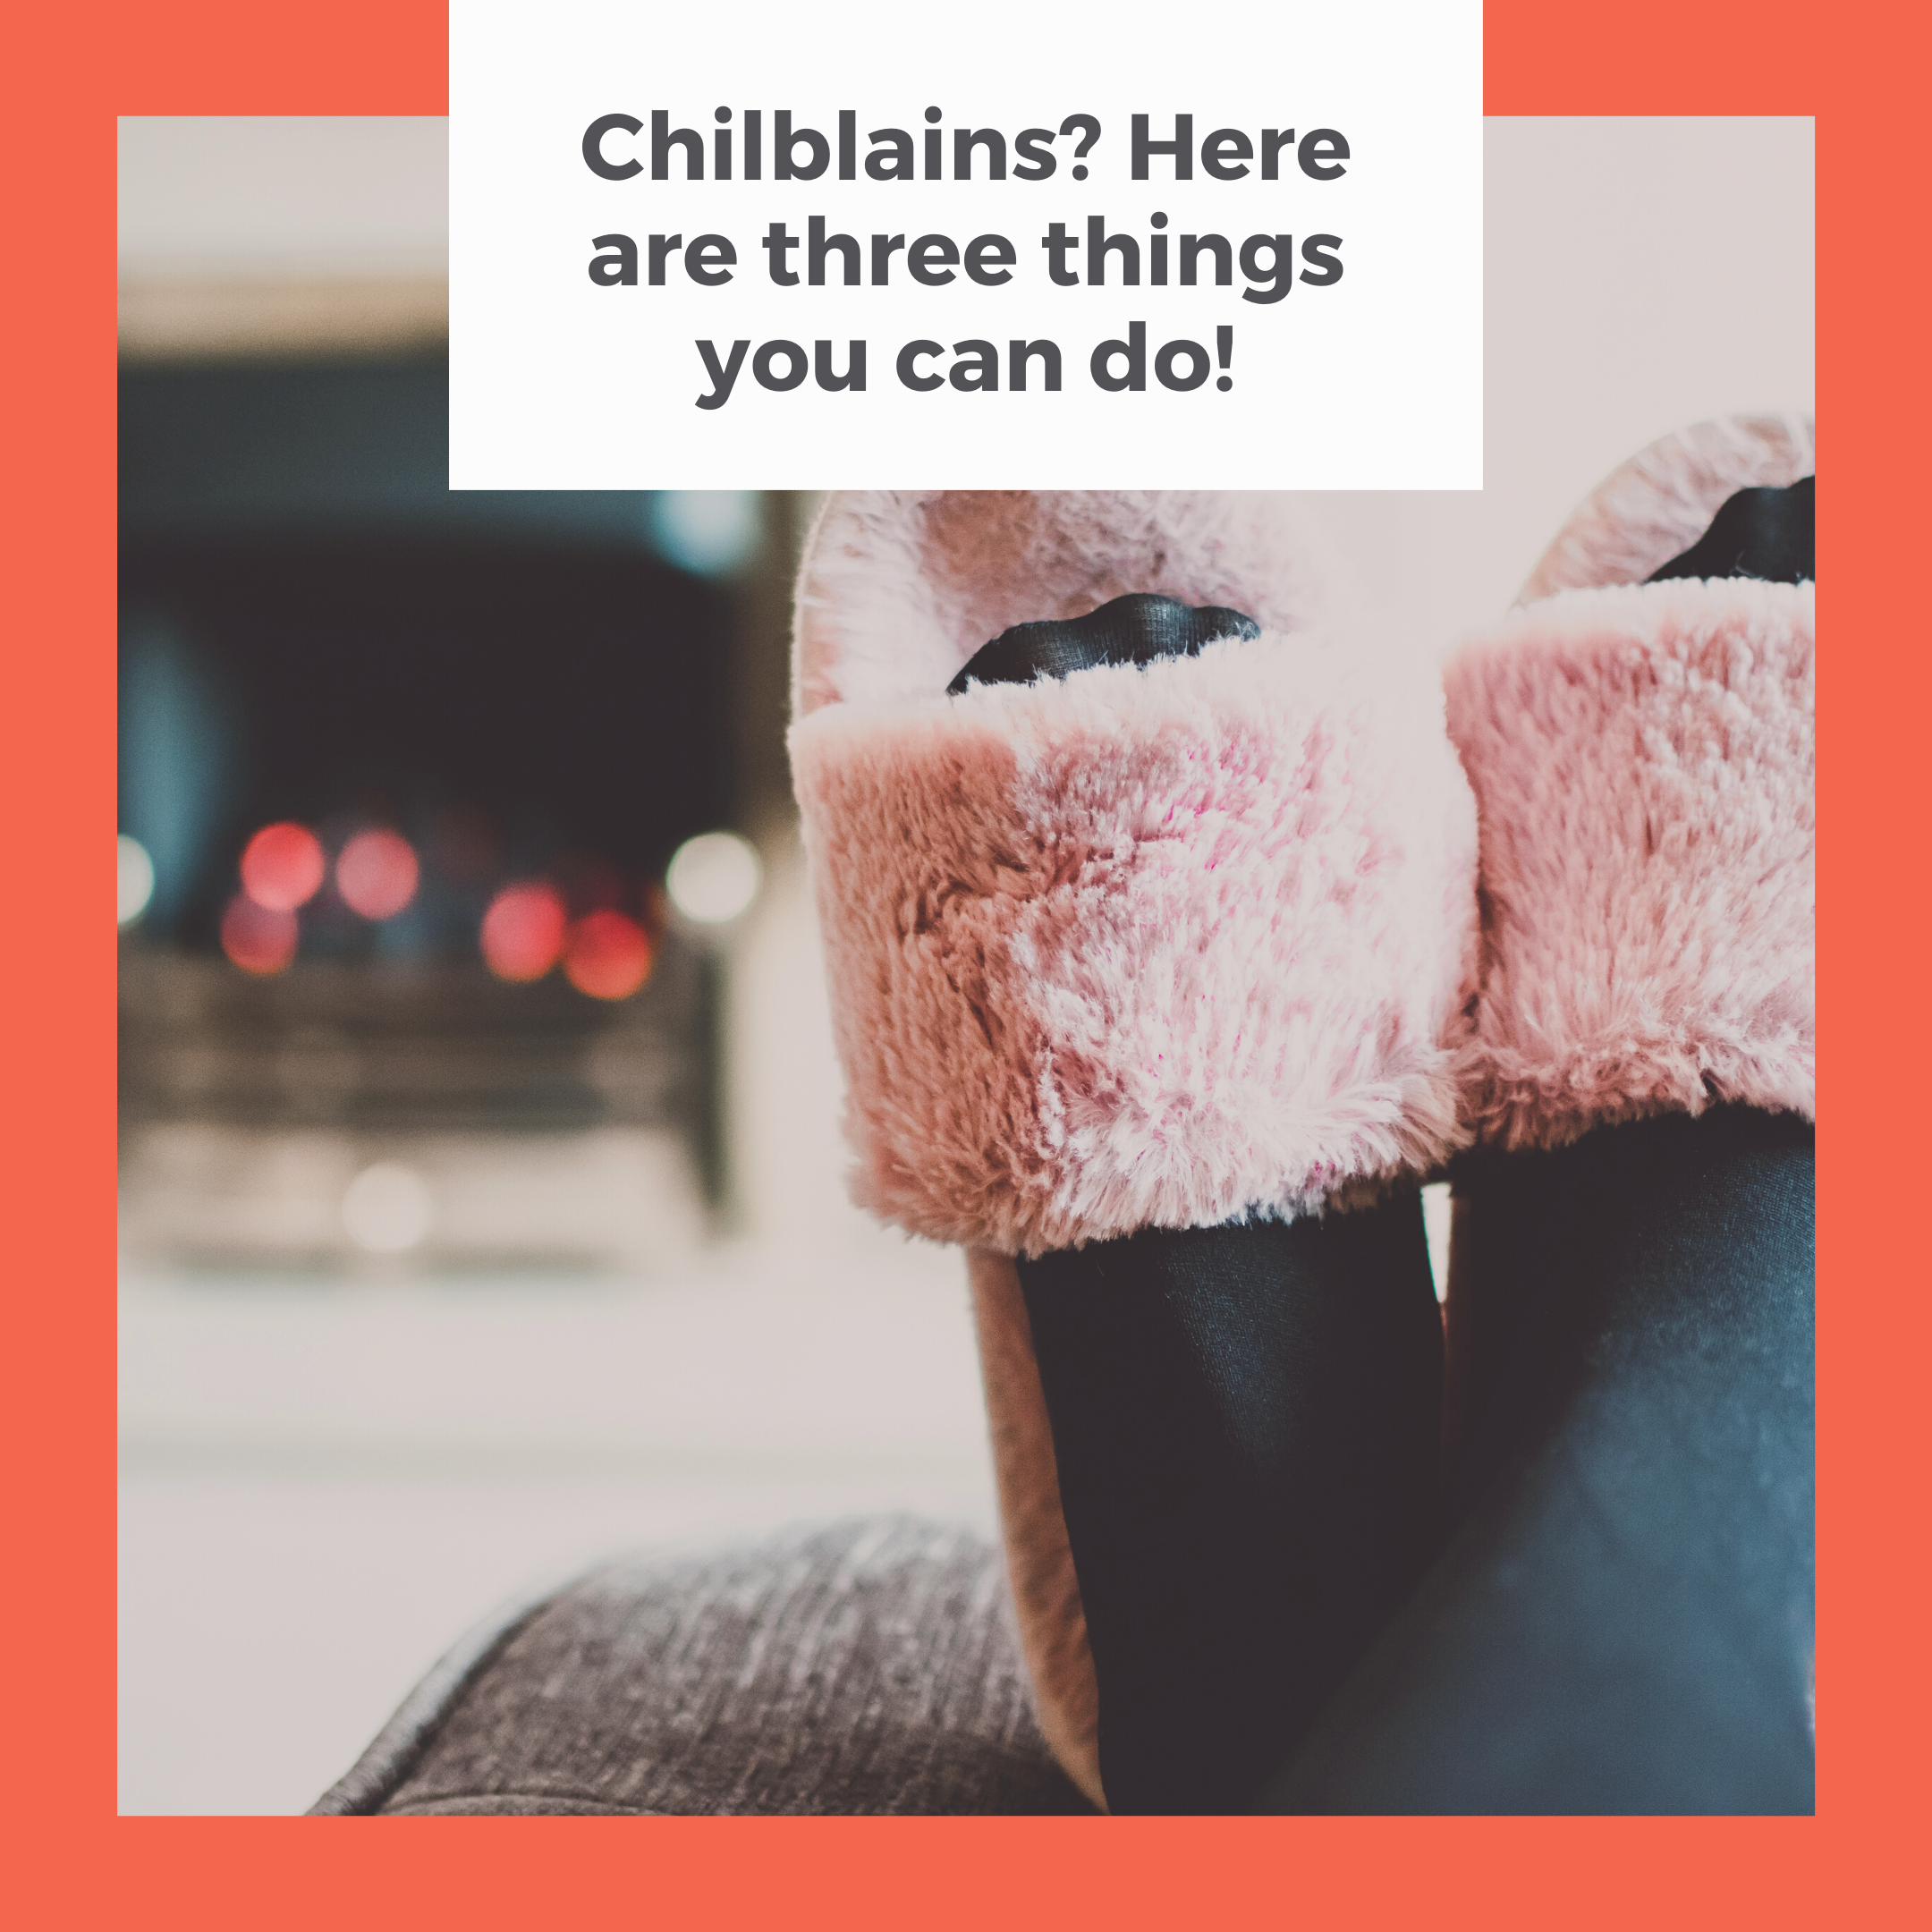 Chilblains? Here are three things you can do